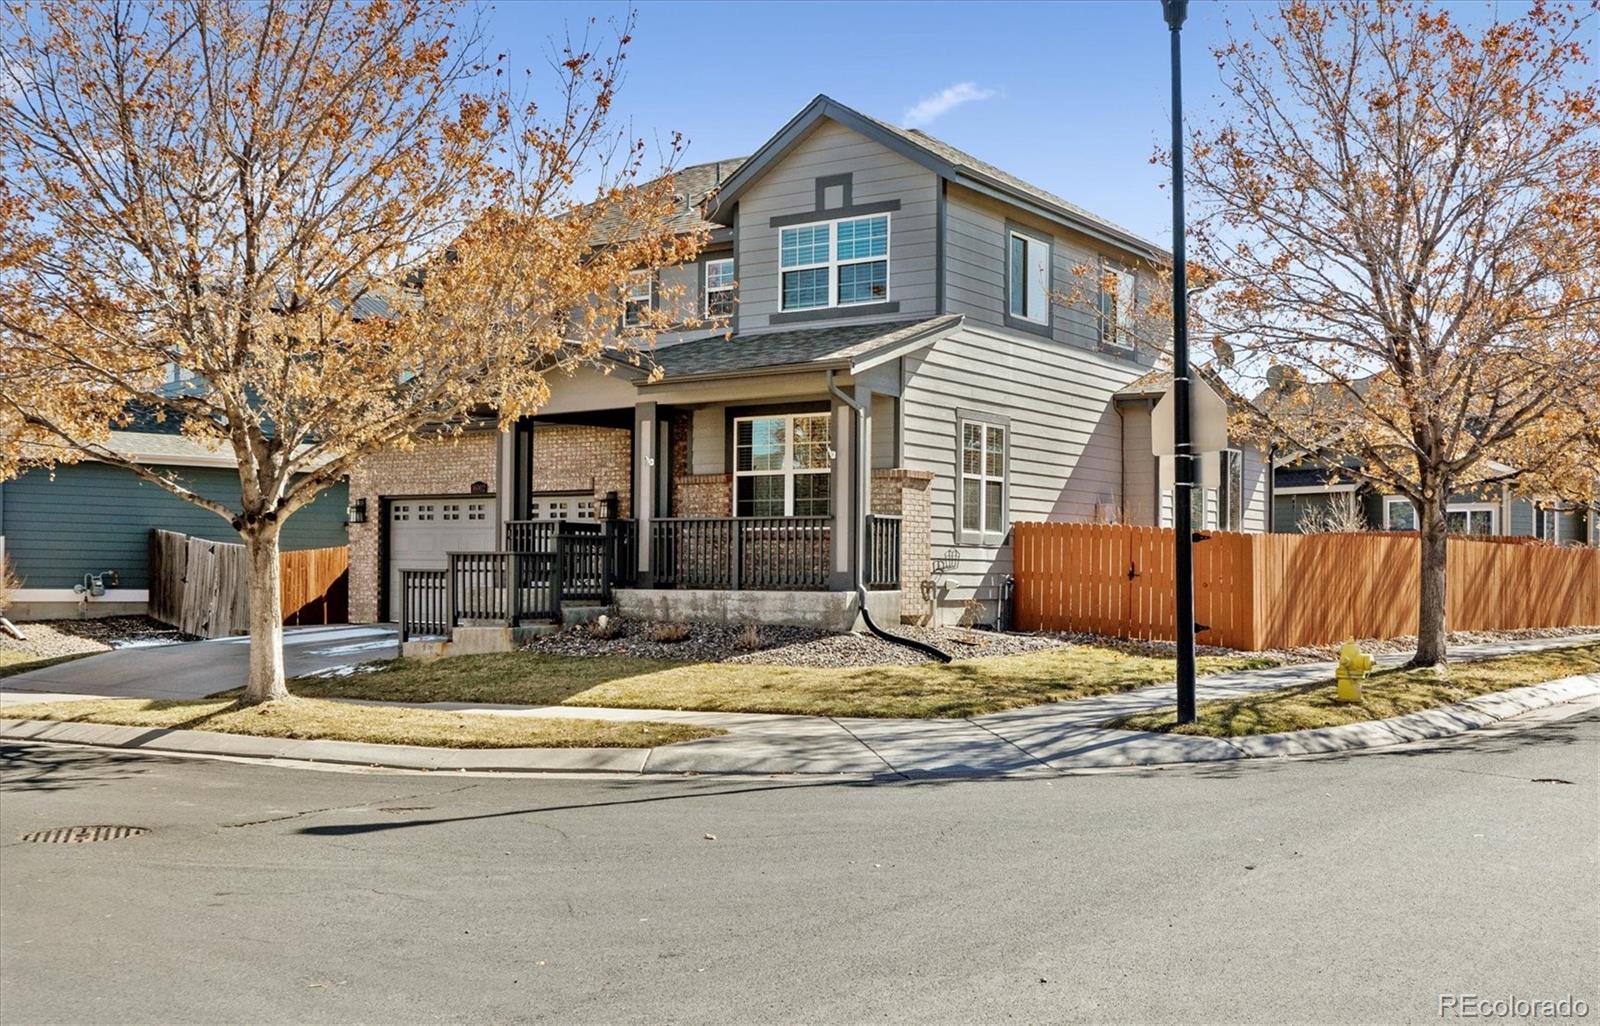 16002 e 98th way, commerce city sold home. Closed on 2024-04-01 for $535,000.